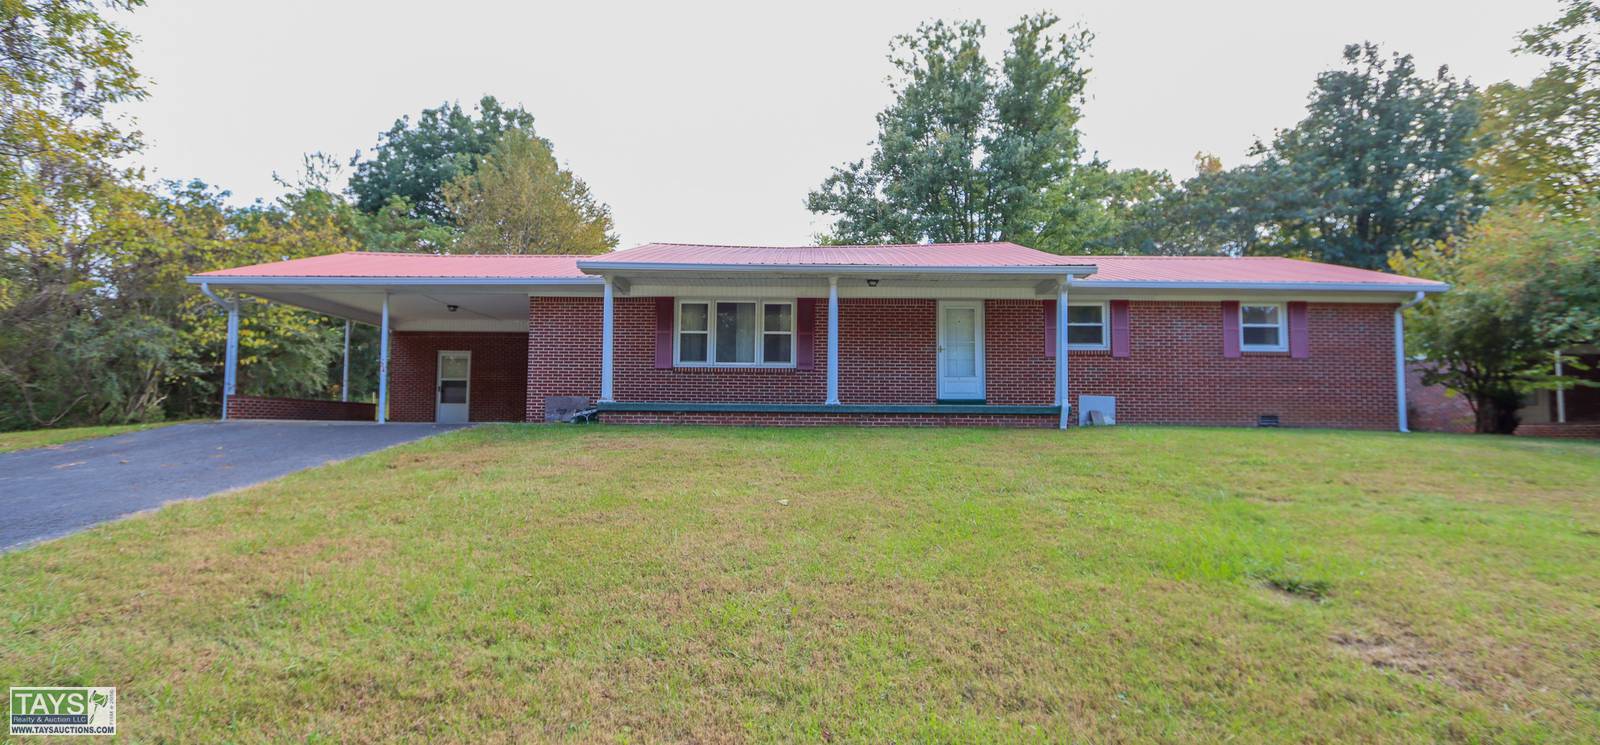 ONLINE ABSOLUTE AUCTION: 4 BR / 2 BA BRICK HOME on 0.43 Ac±